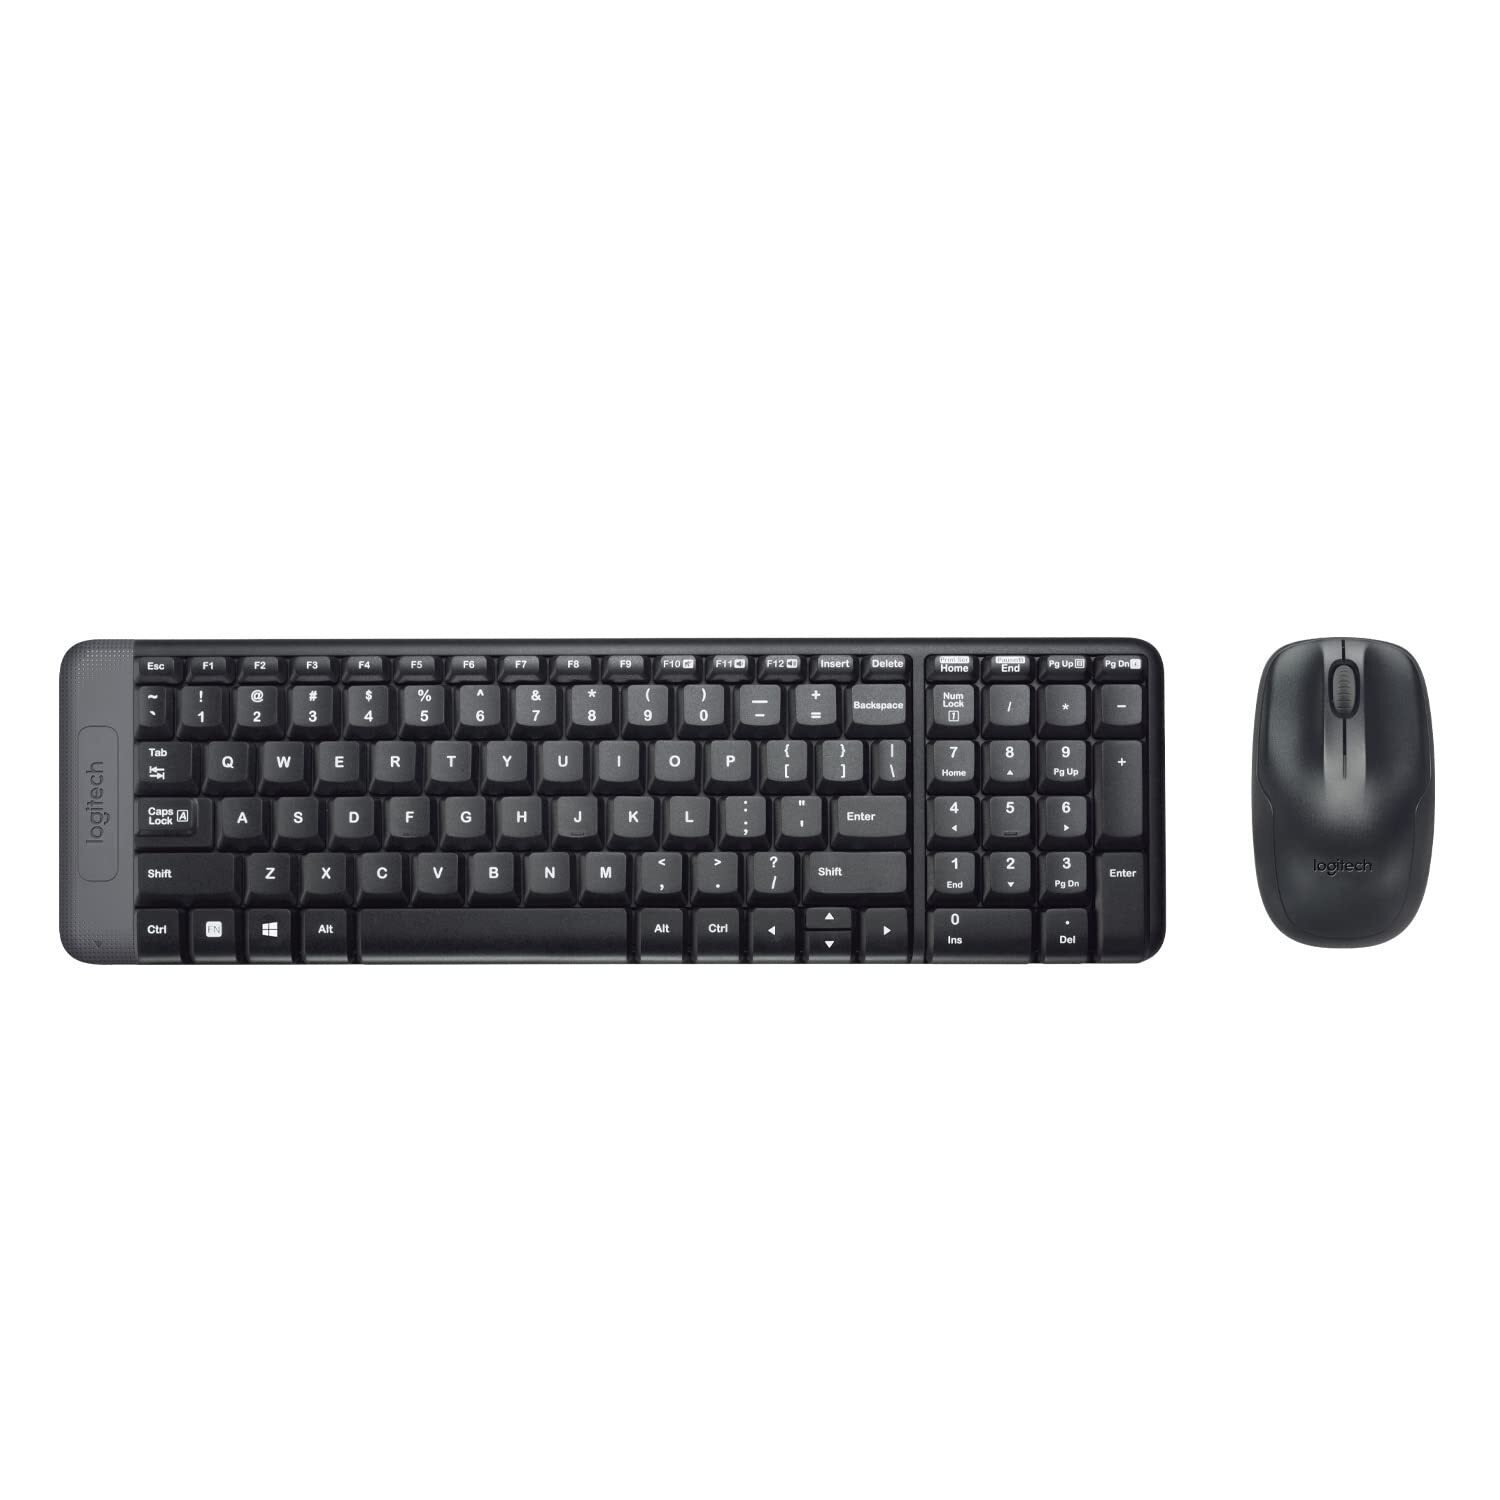 Logitech MK220 Compact Wireless Keyboard and Mouse Set for Windows, 2.4 GHz Wireless with Unifying USB-Receiver, 24 Month Battery, Compatible with PC, Laptop - Black